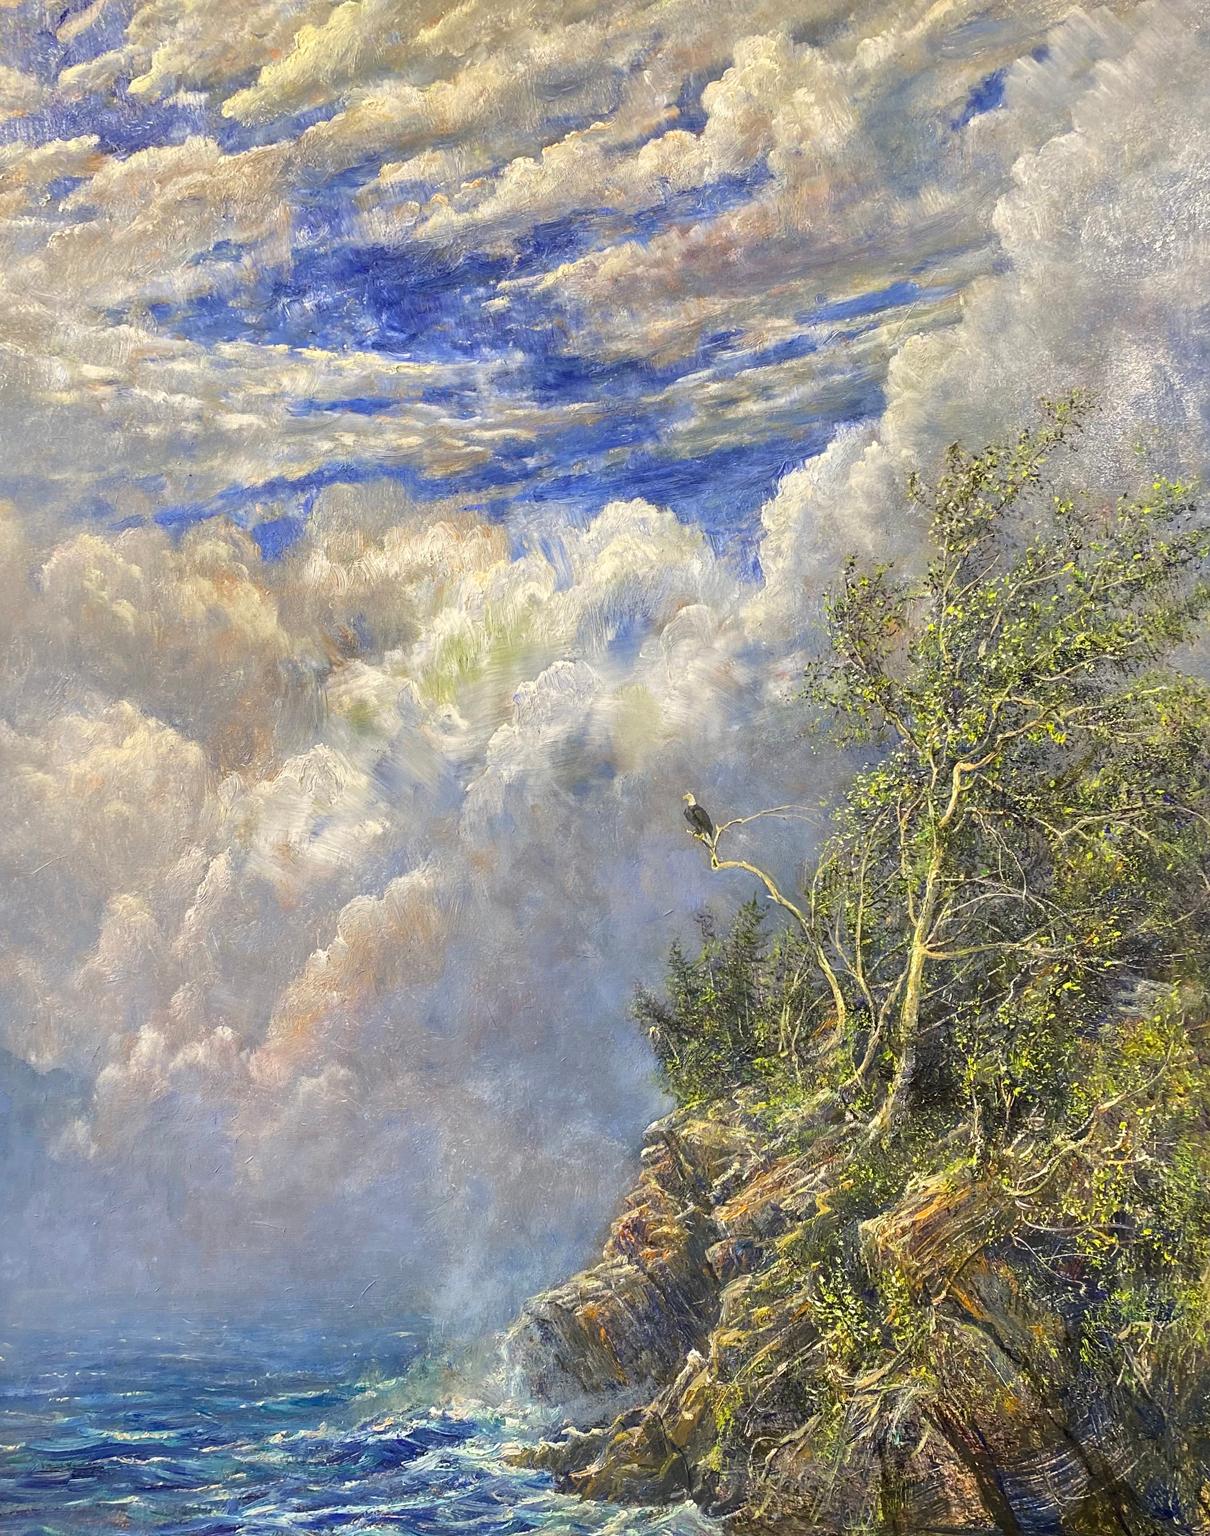 Nicholas Oberling Landscape Painting - Northwest Montana Wilderness Shore with Bald Eagle